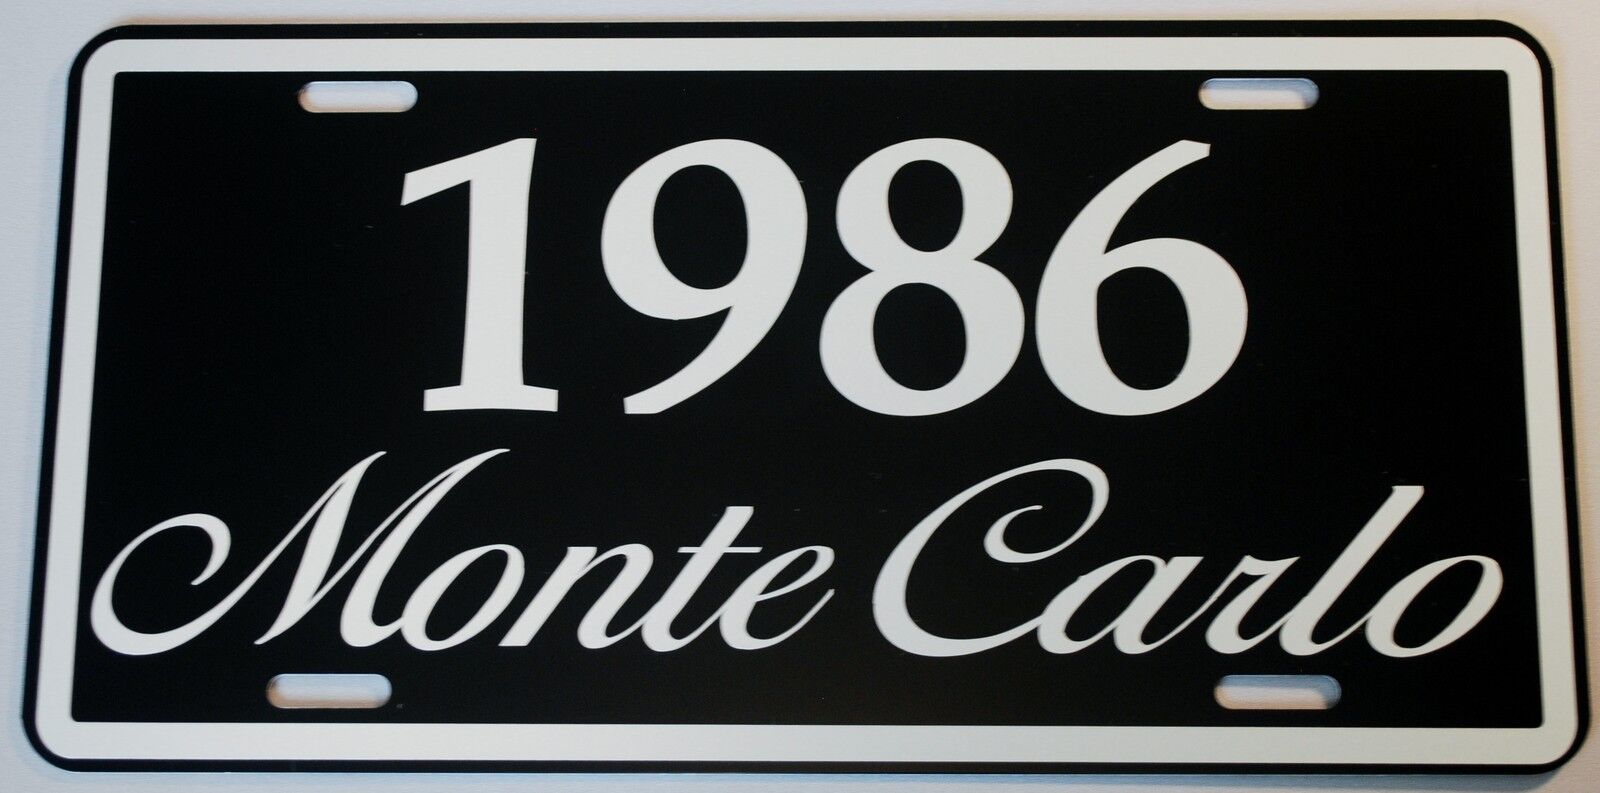 1986 86 MONTE CARLO METAL LICENSE PLATE 350 400 454 SS LOWRIDER NASCAR CHEVY